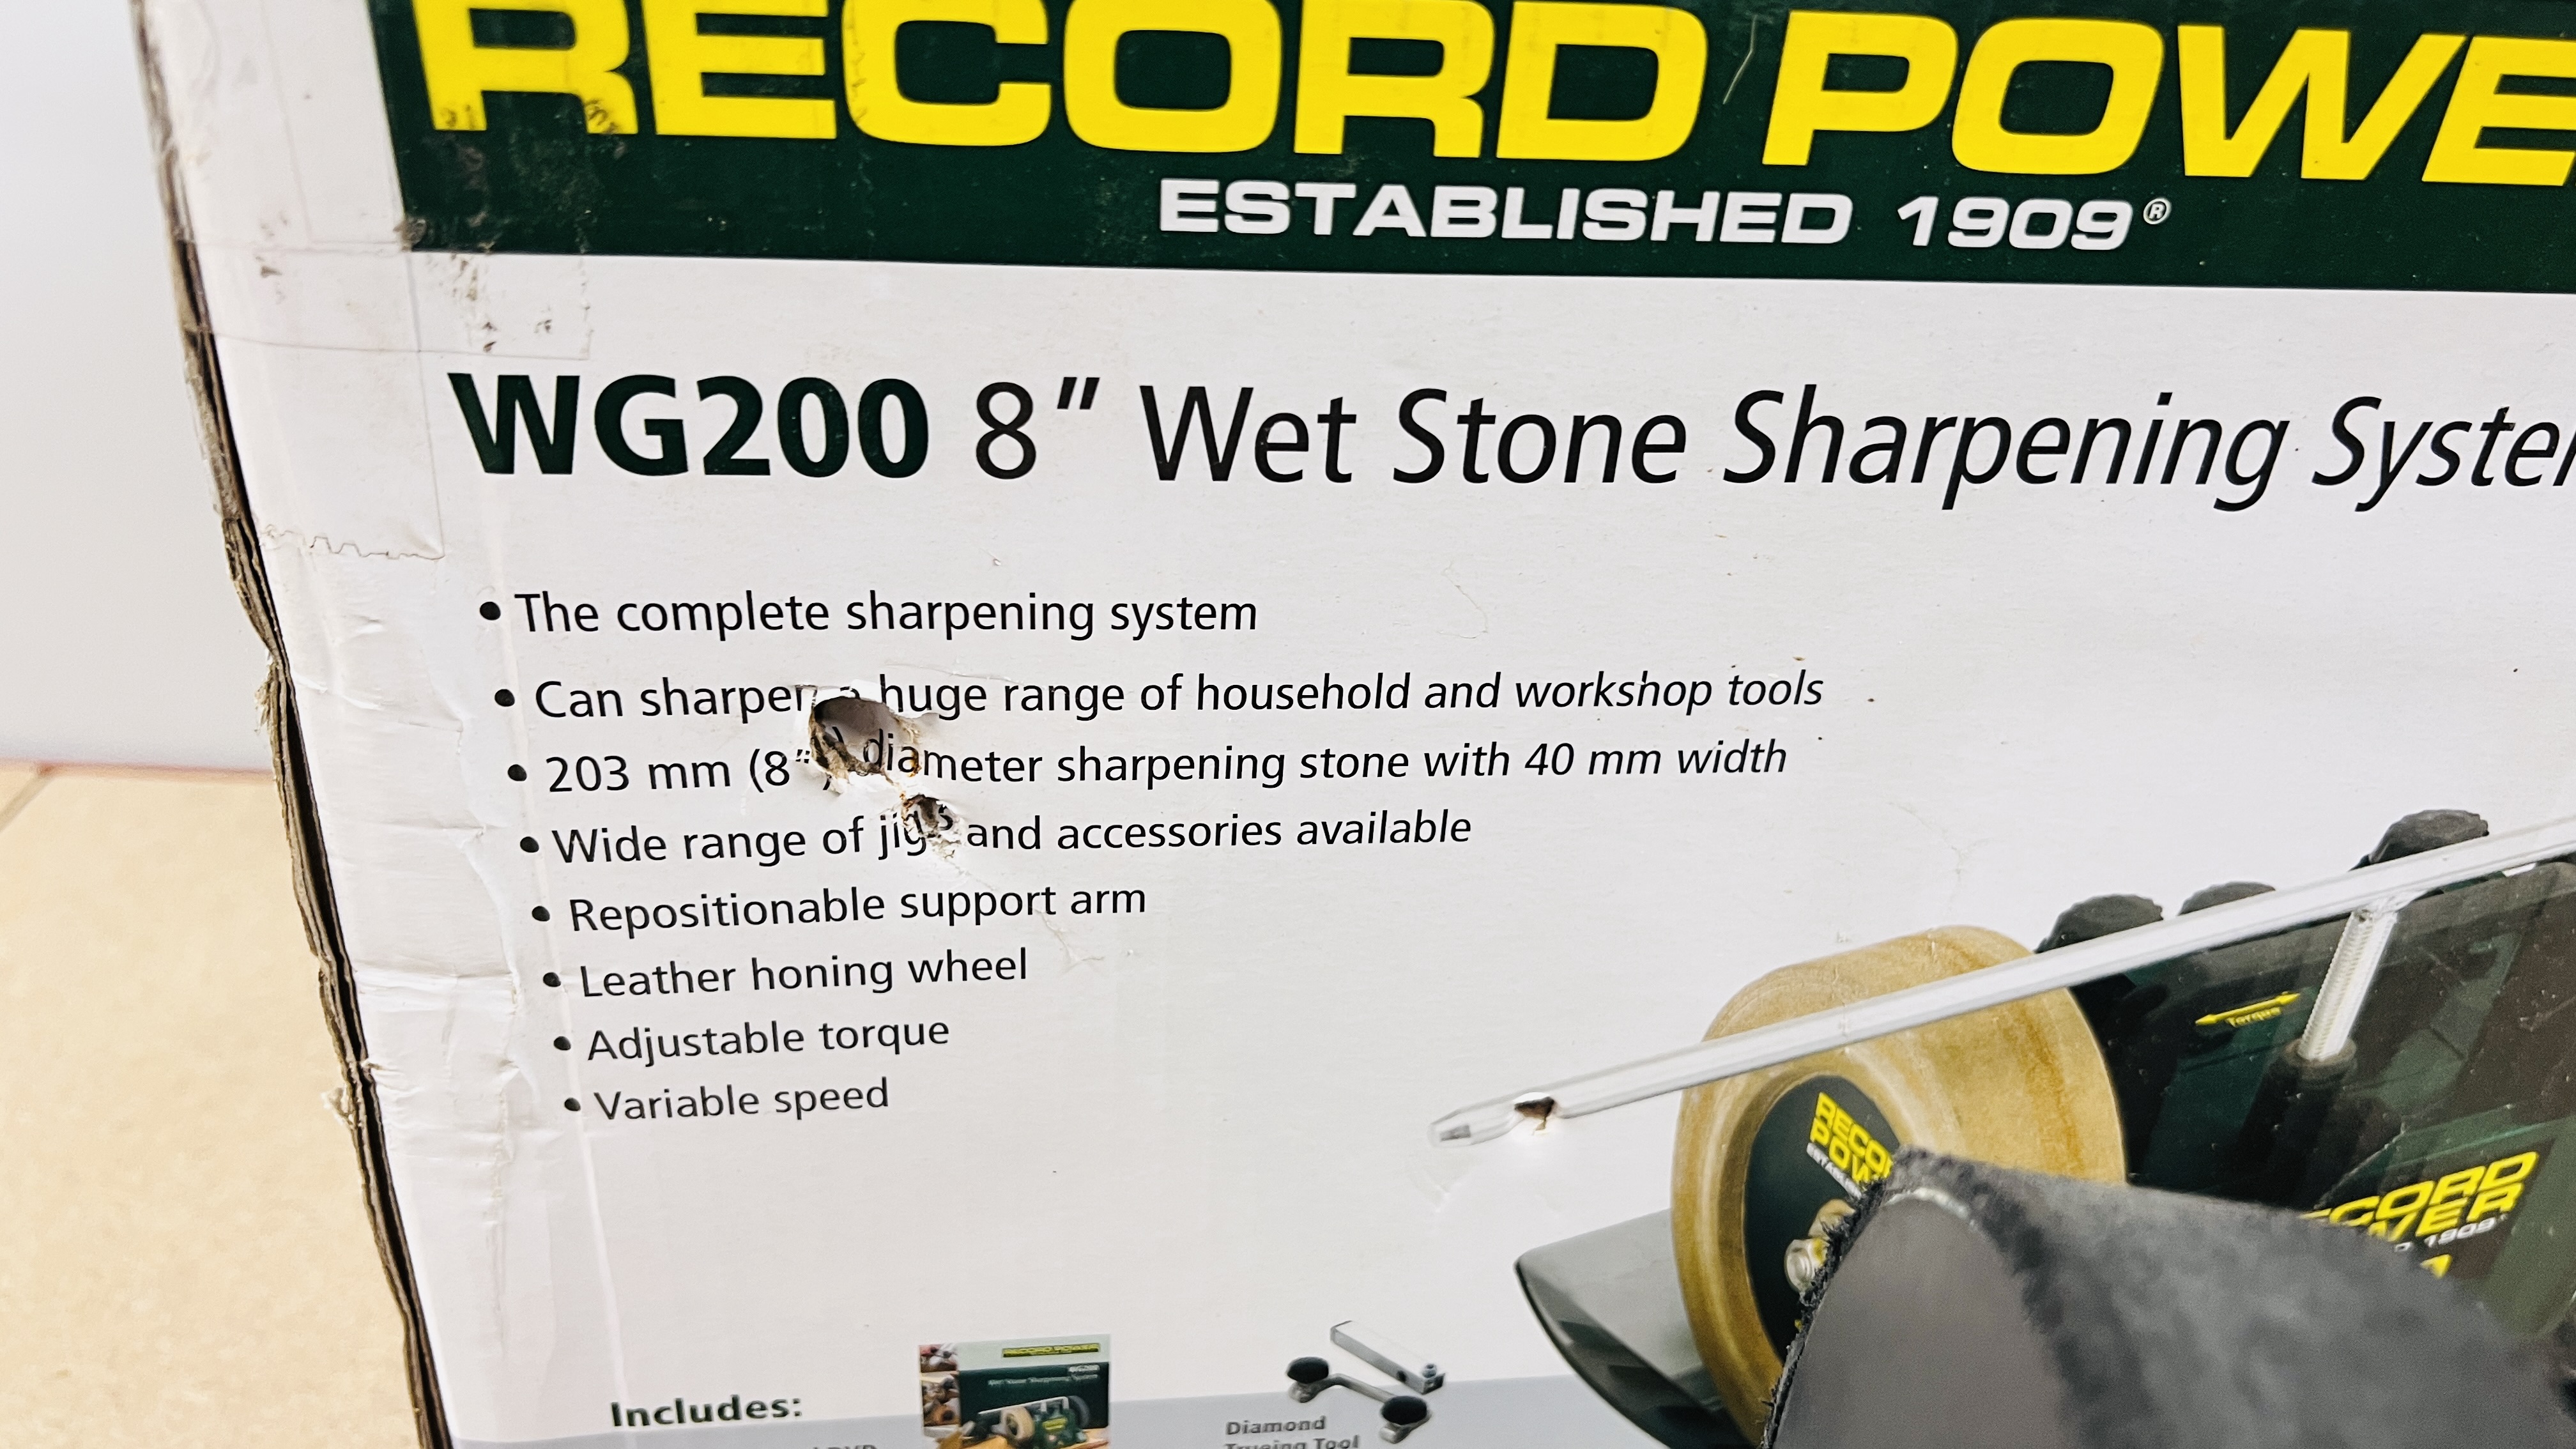 RECORD POWER WG200 8" WET STONE SHARPENING SYSTEM (WITH BOX) - SOLD AS SEEN. - Image 3 of 3